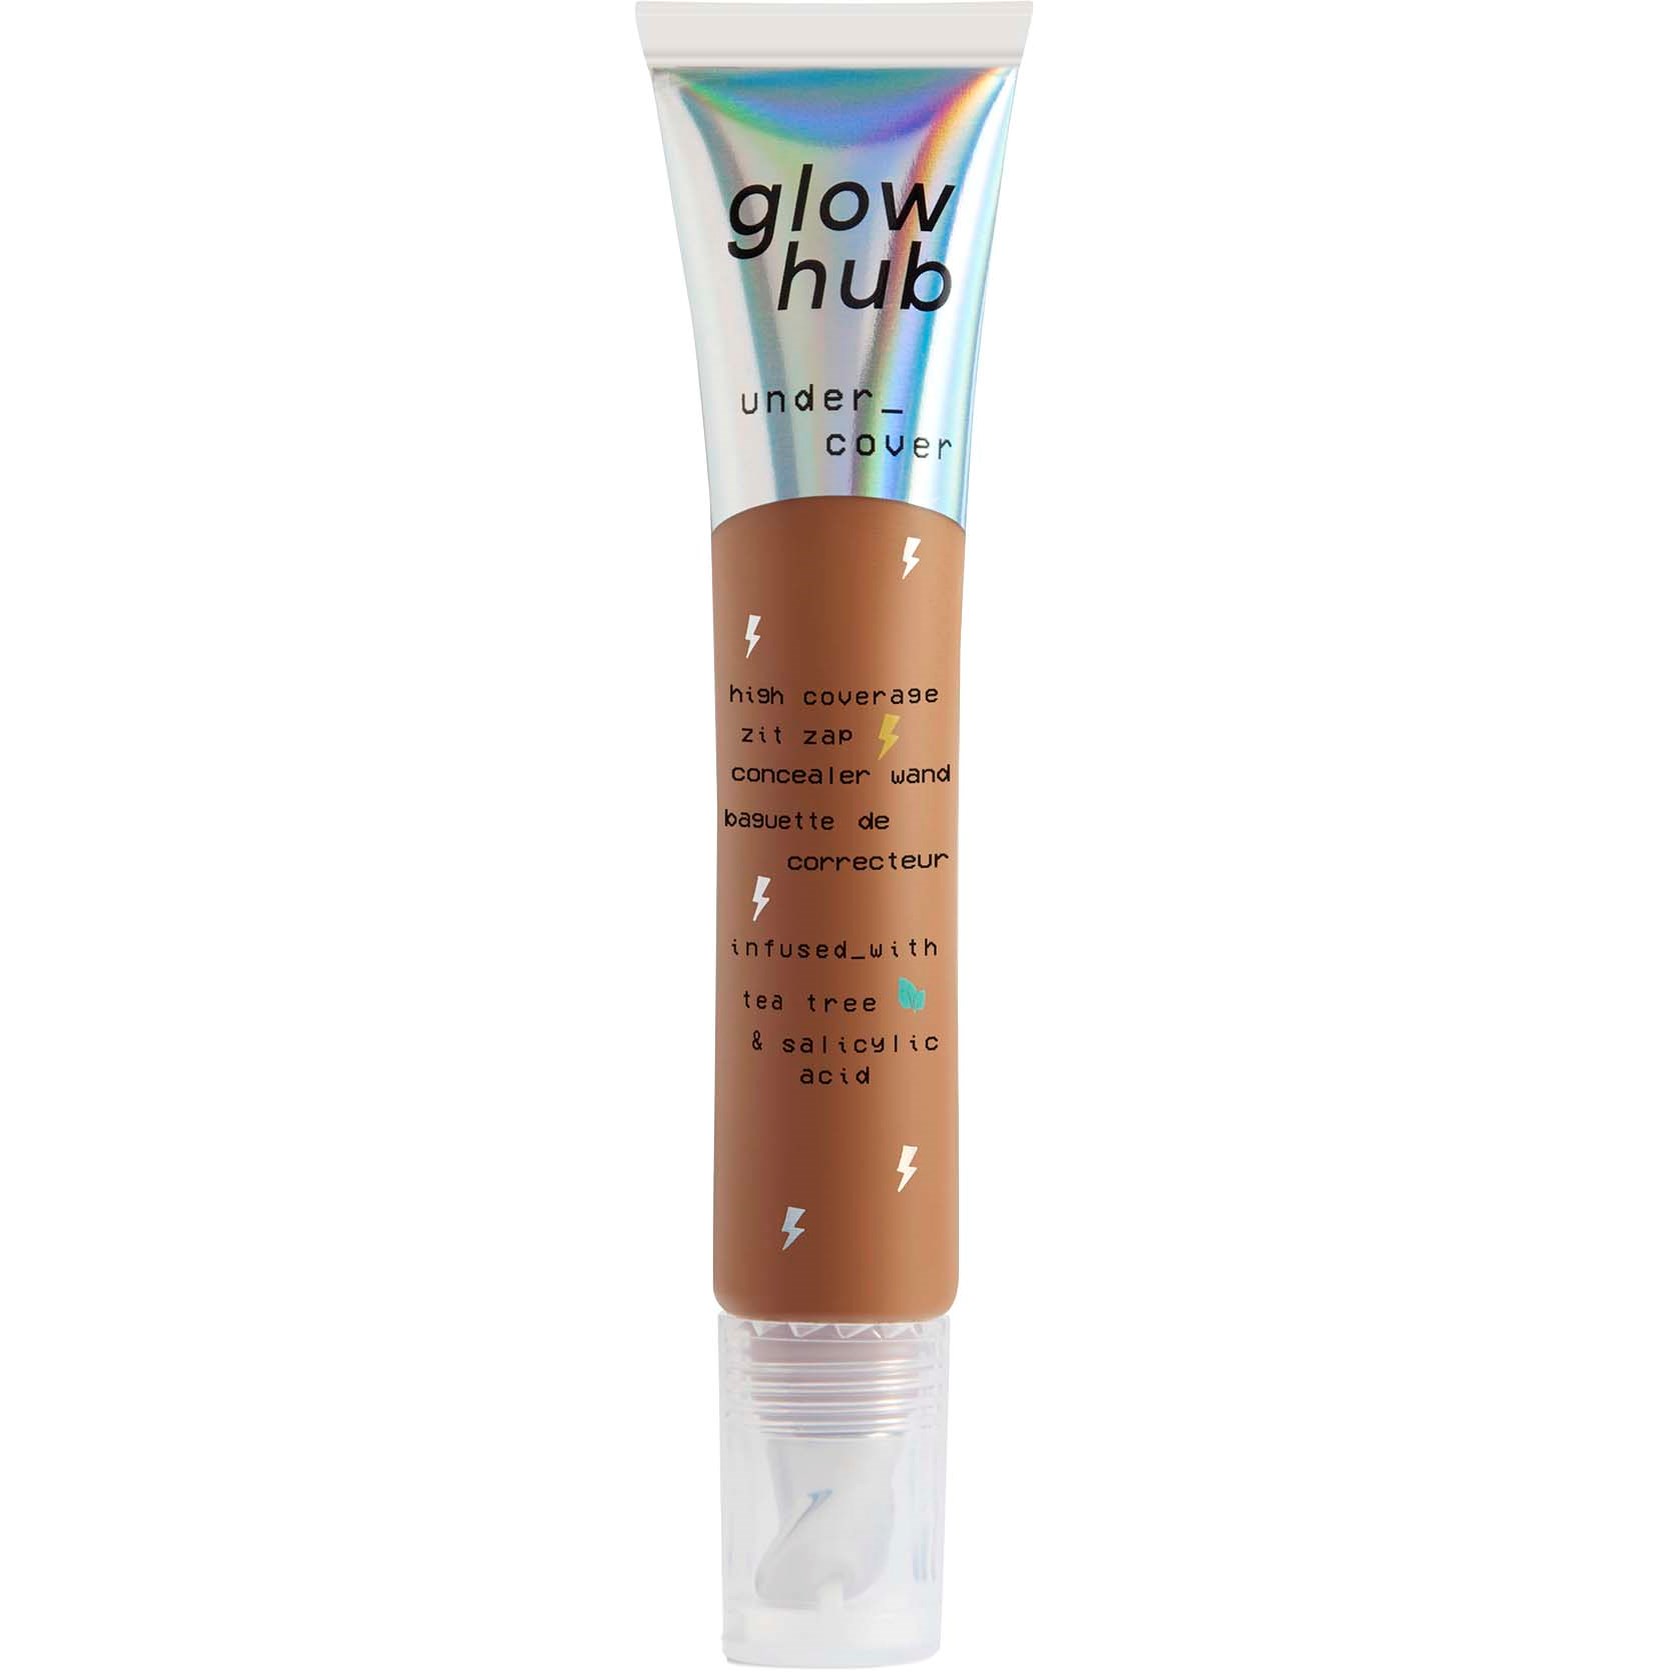 Läs mer om Glow Hub Under Cover High Coverage Zit Zap Concealer Wand 21W Olly